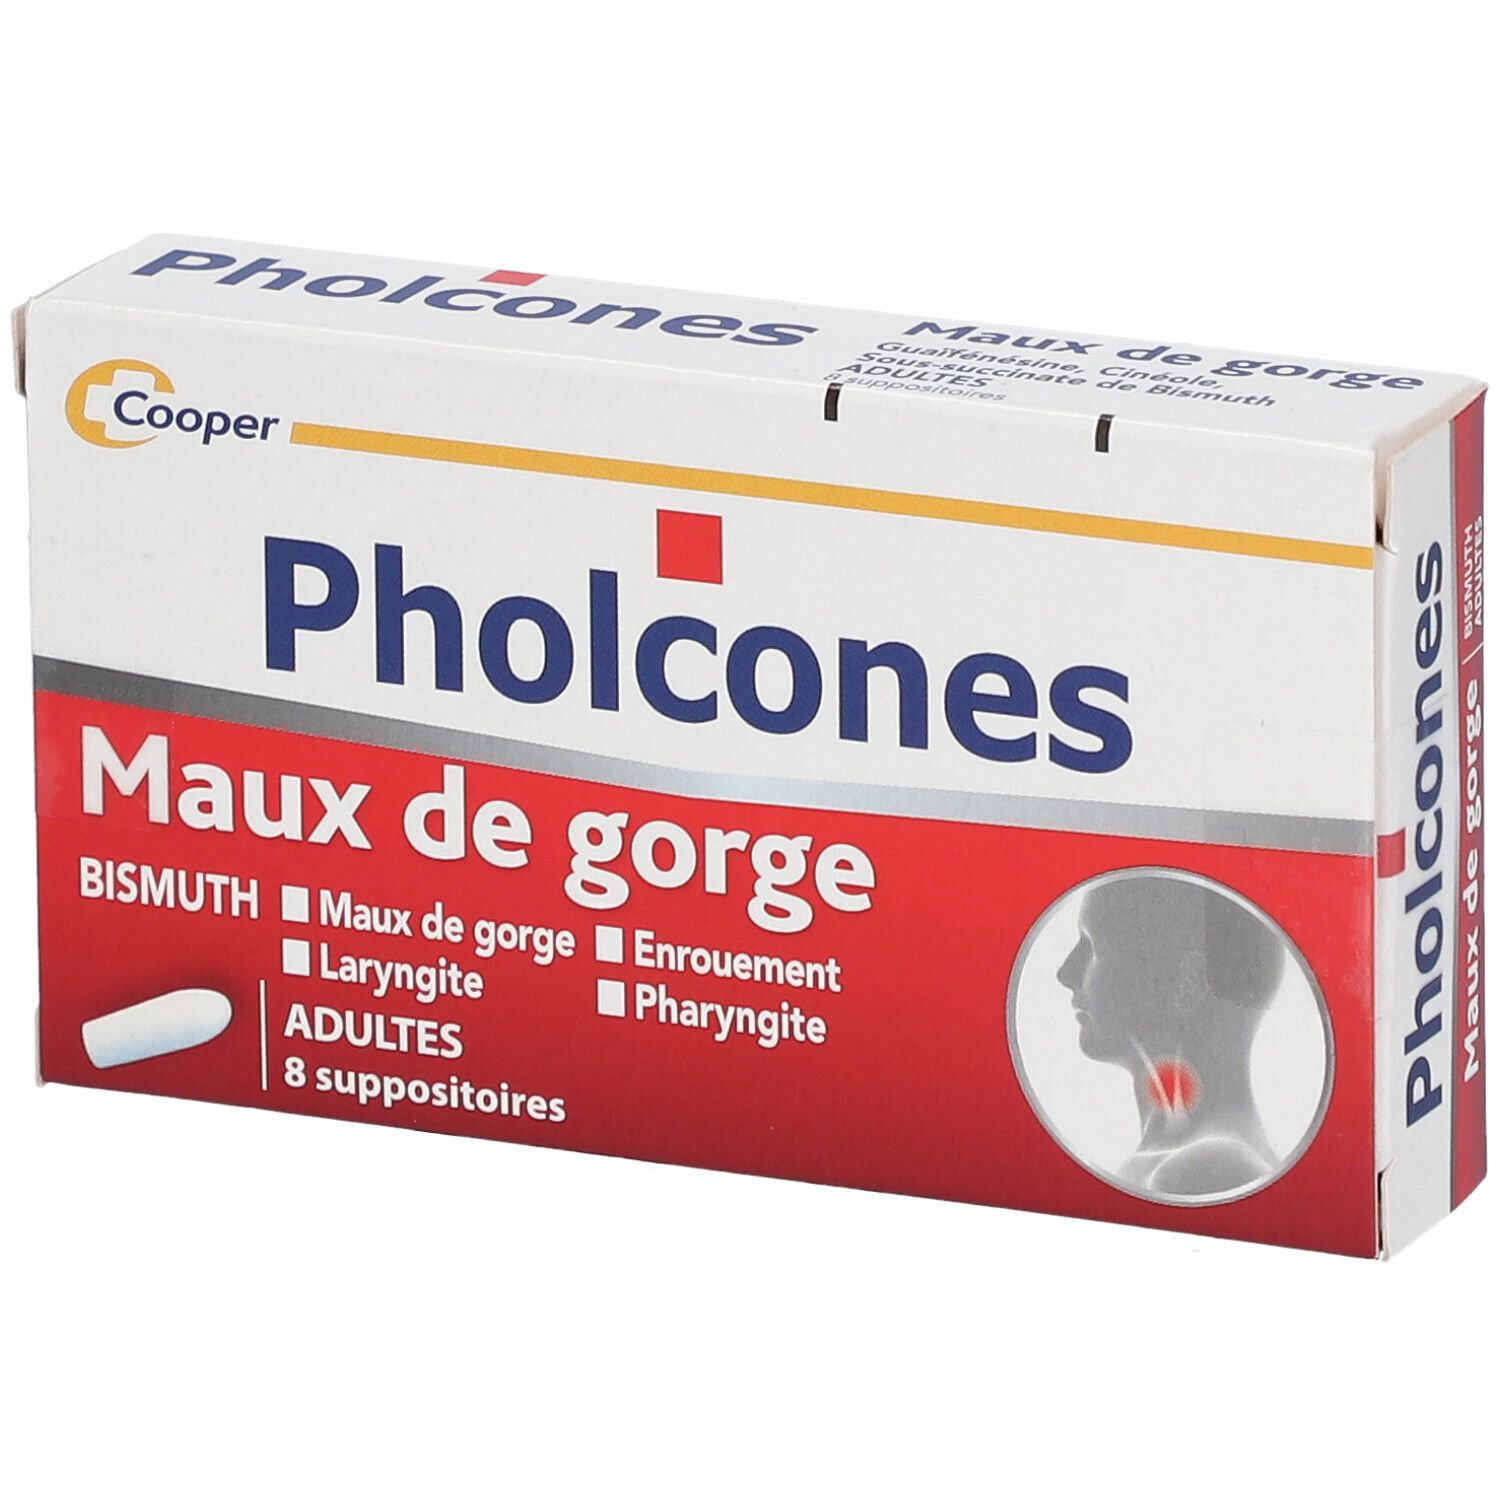 Pholcones AD 8 Suppos